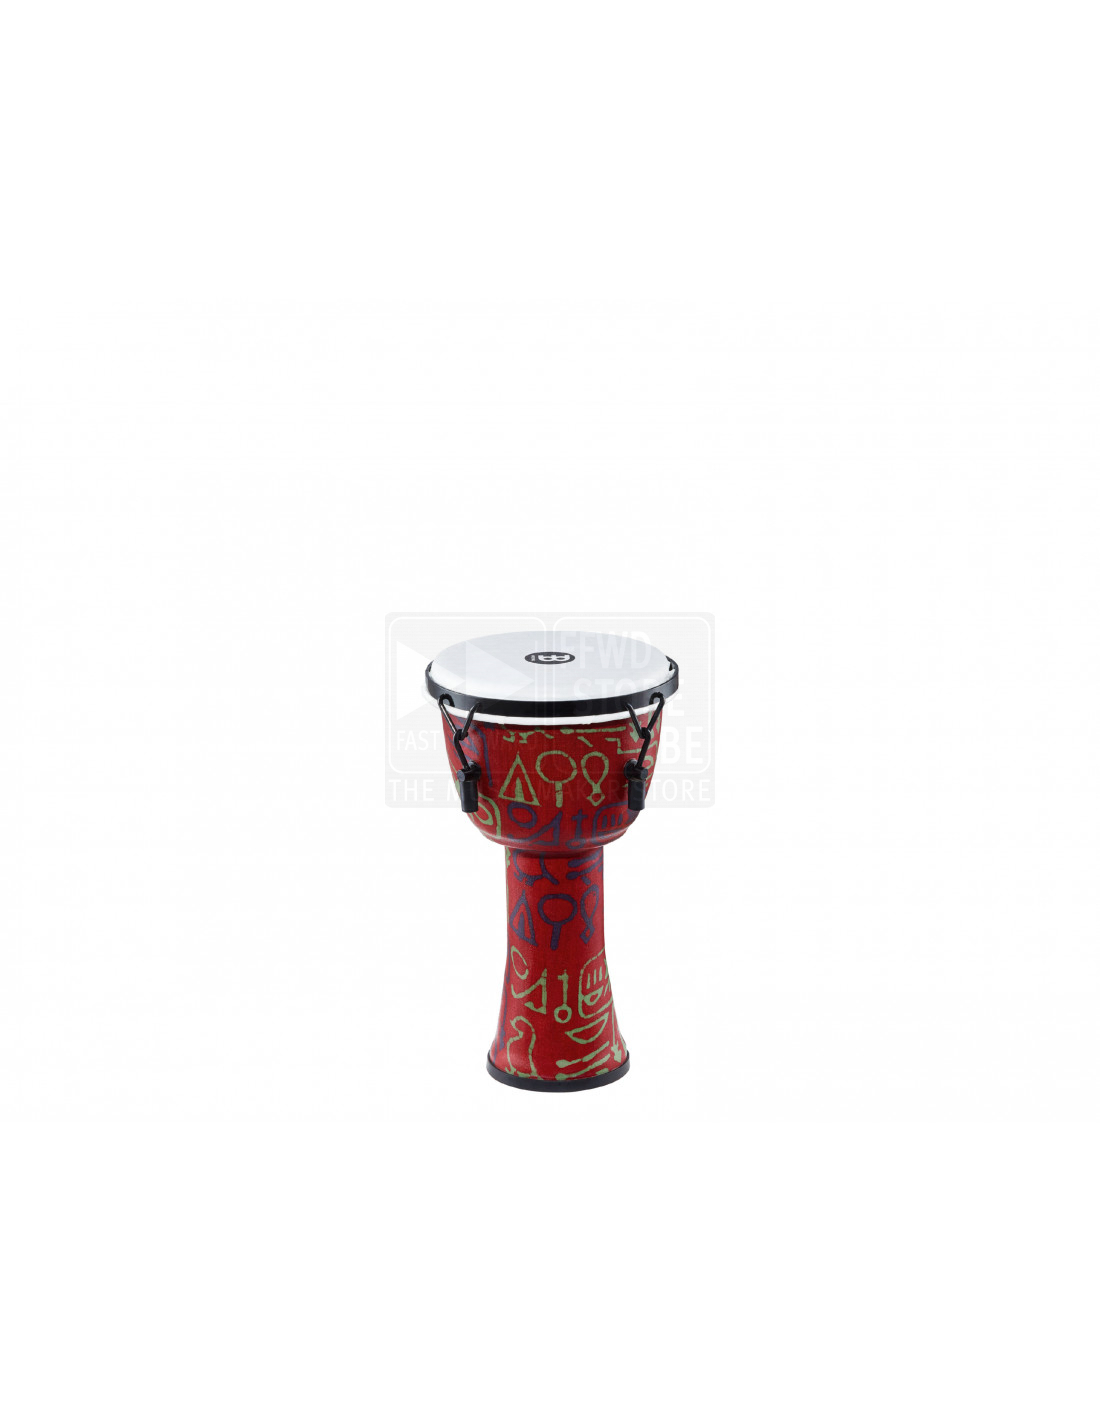 Pharaohs Script Meinl Percussion PMDJ1-M-F Medium Mechanically Tuned Travel Series Djembe with Synthetic Shell and Head 